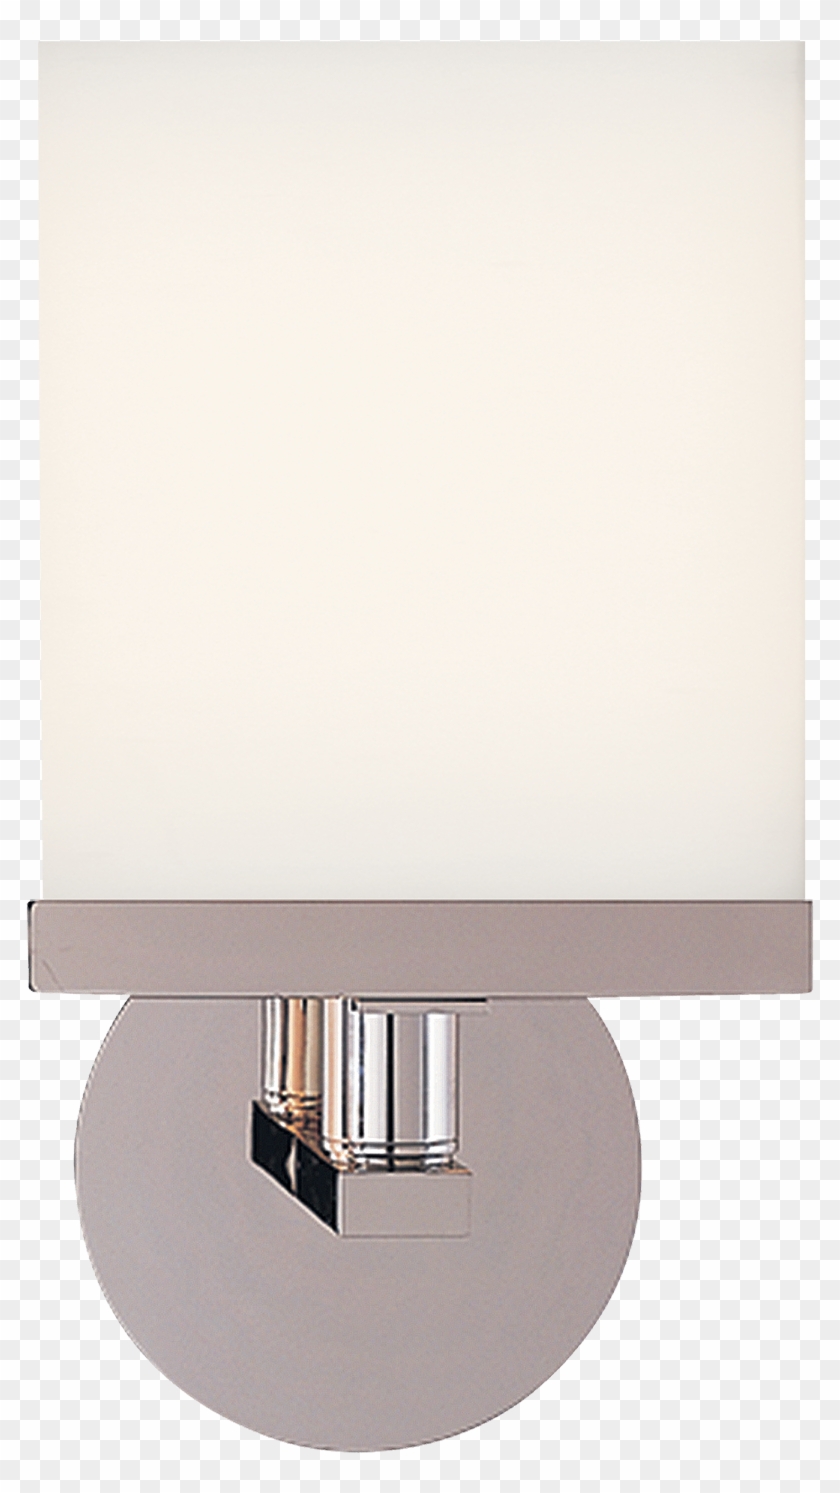 Shield Round Sconce In Polished Nickel With White Flat - Lampshade Clipart #4923916